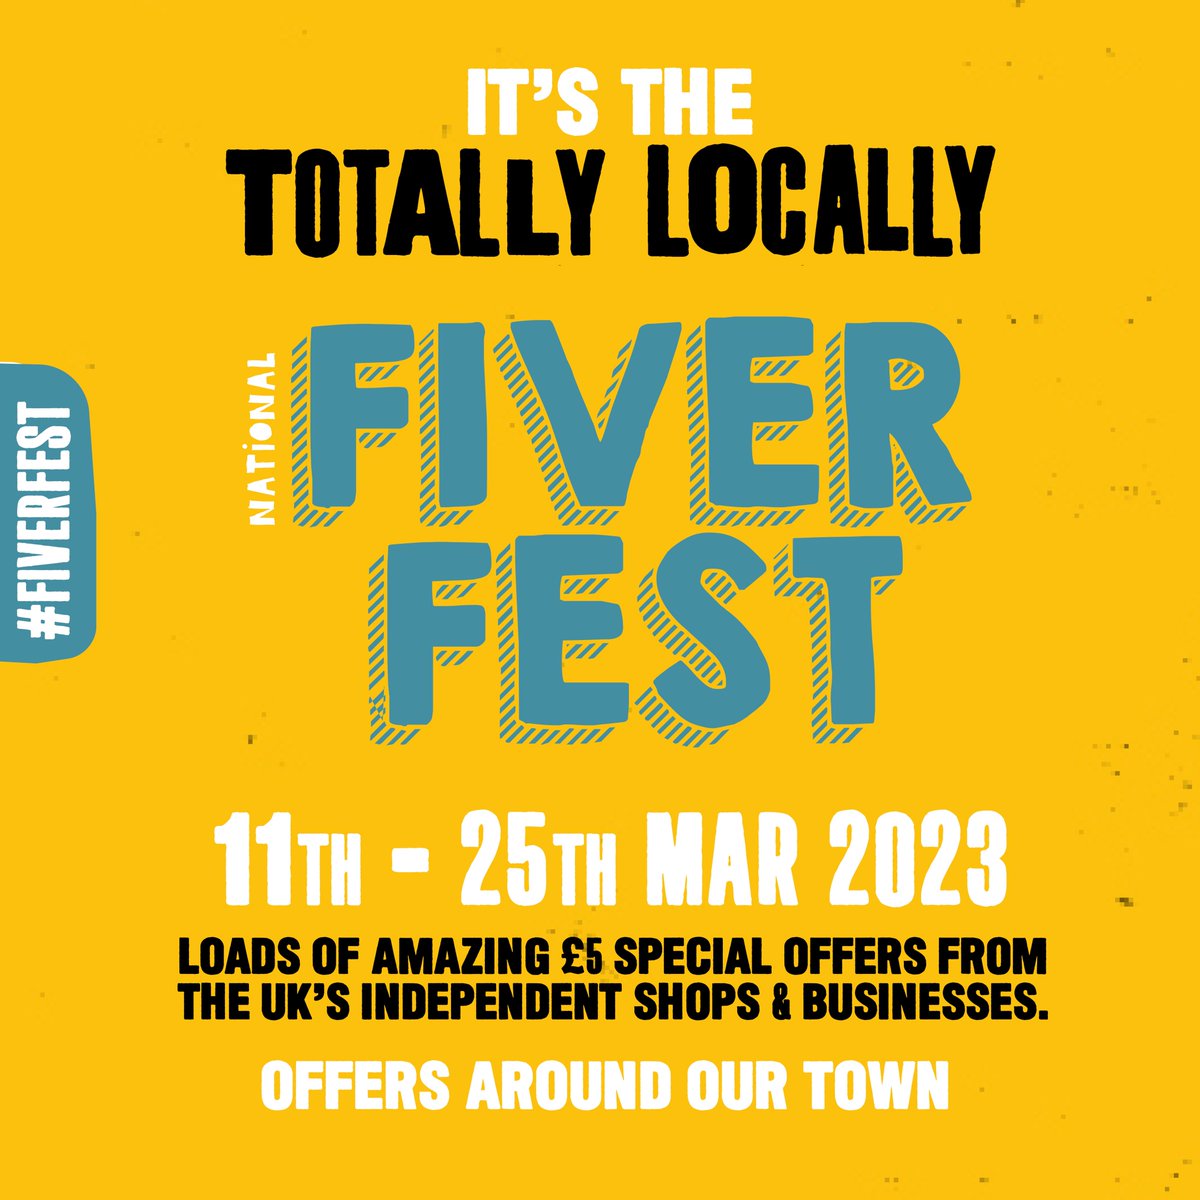 Coming to the lovely town of Kirkbymoorside very soon, Fiver Fest bargains in our lovely, friendly local shops - lets shop Totally Locally #FIVERFEST @KirkbyBand #Kirkbymoorside @KmsRLT